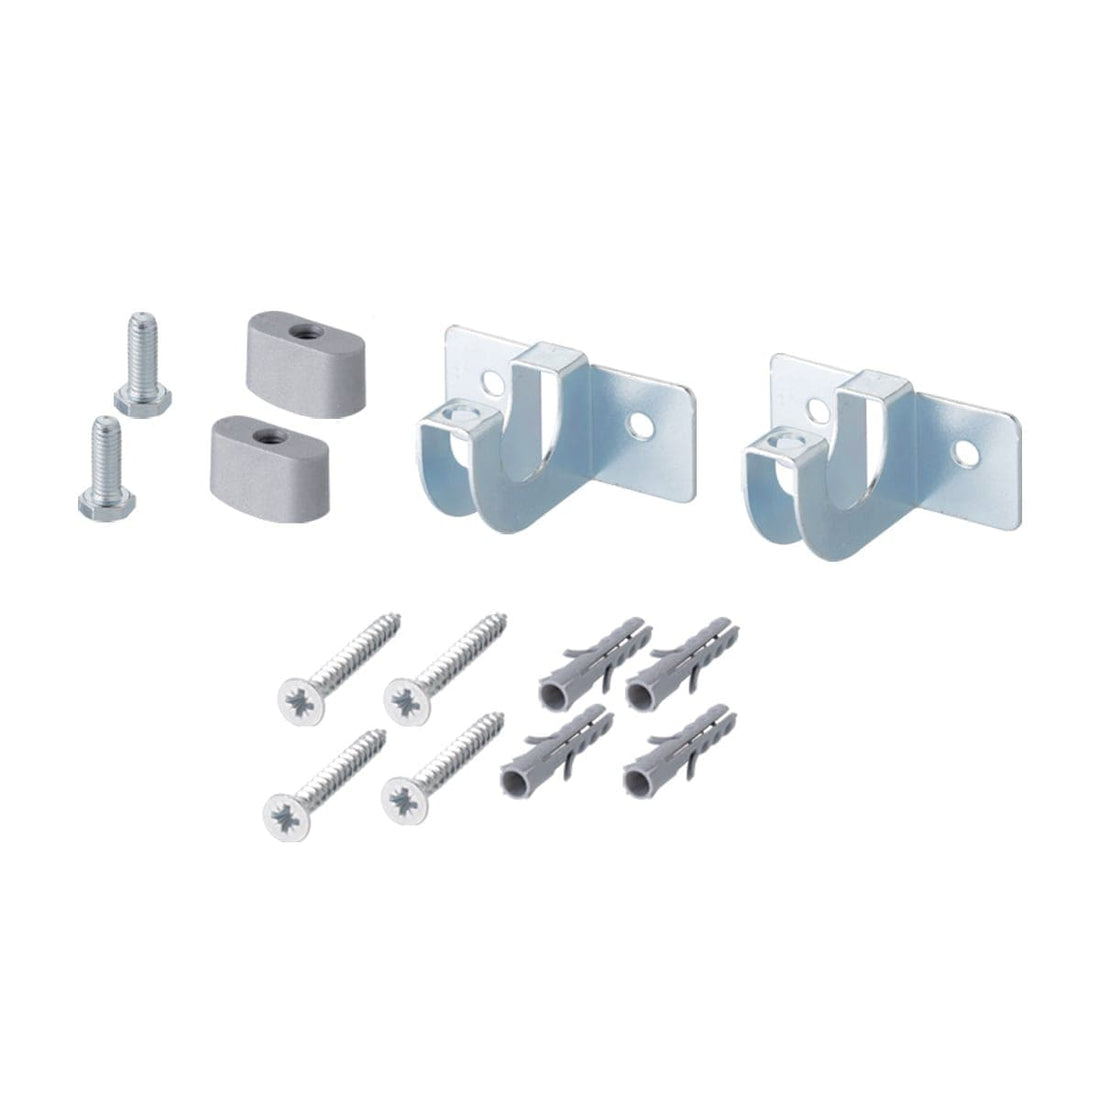 CLABER WALL BRACKETS FOR HOSE REELS - best price from Maltashopper.com BR500413103